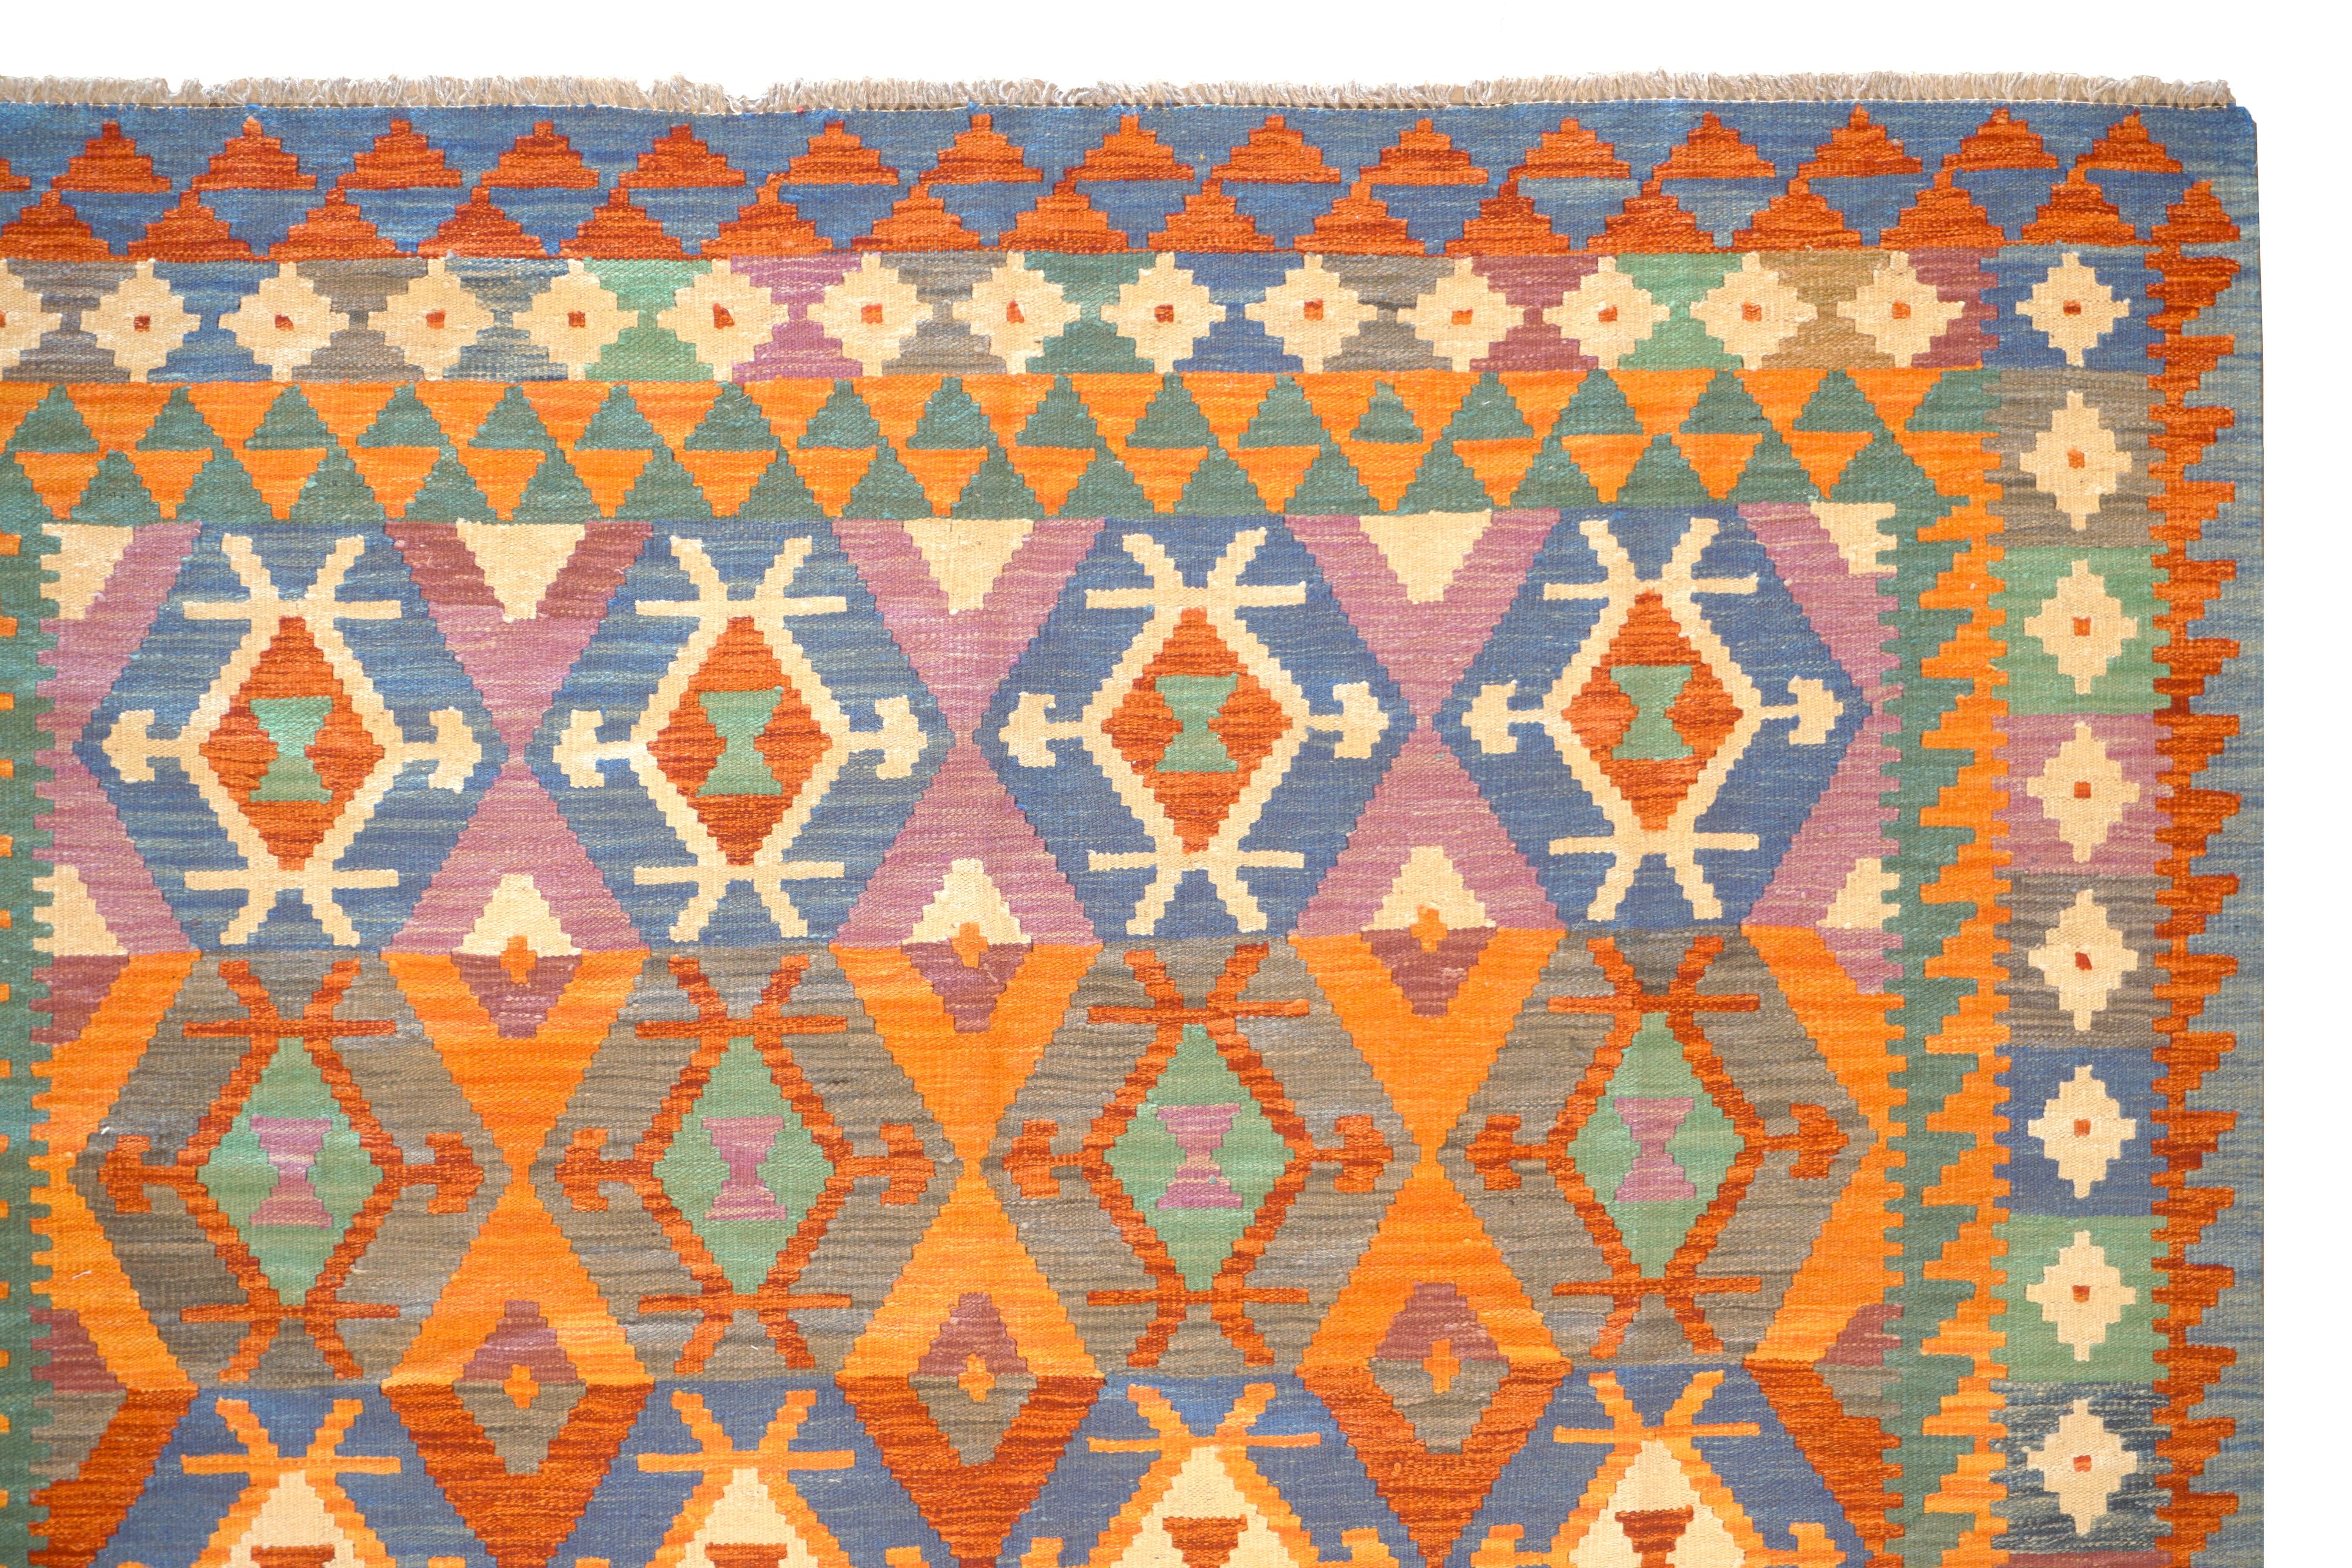 Hand-Woven Multicolored Afghan Kilim For Sale